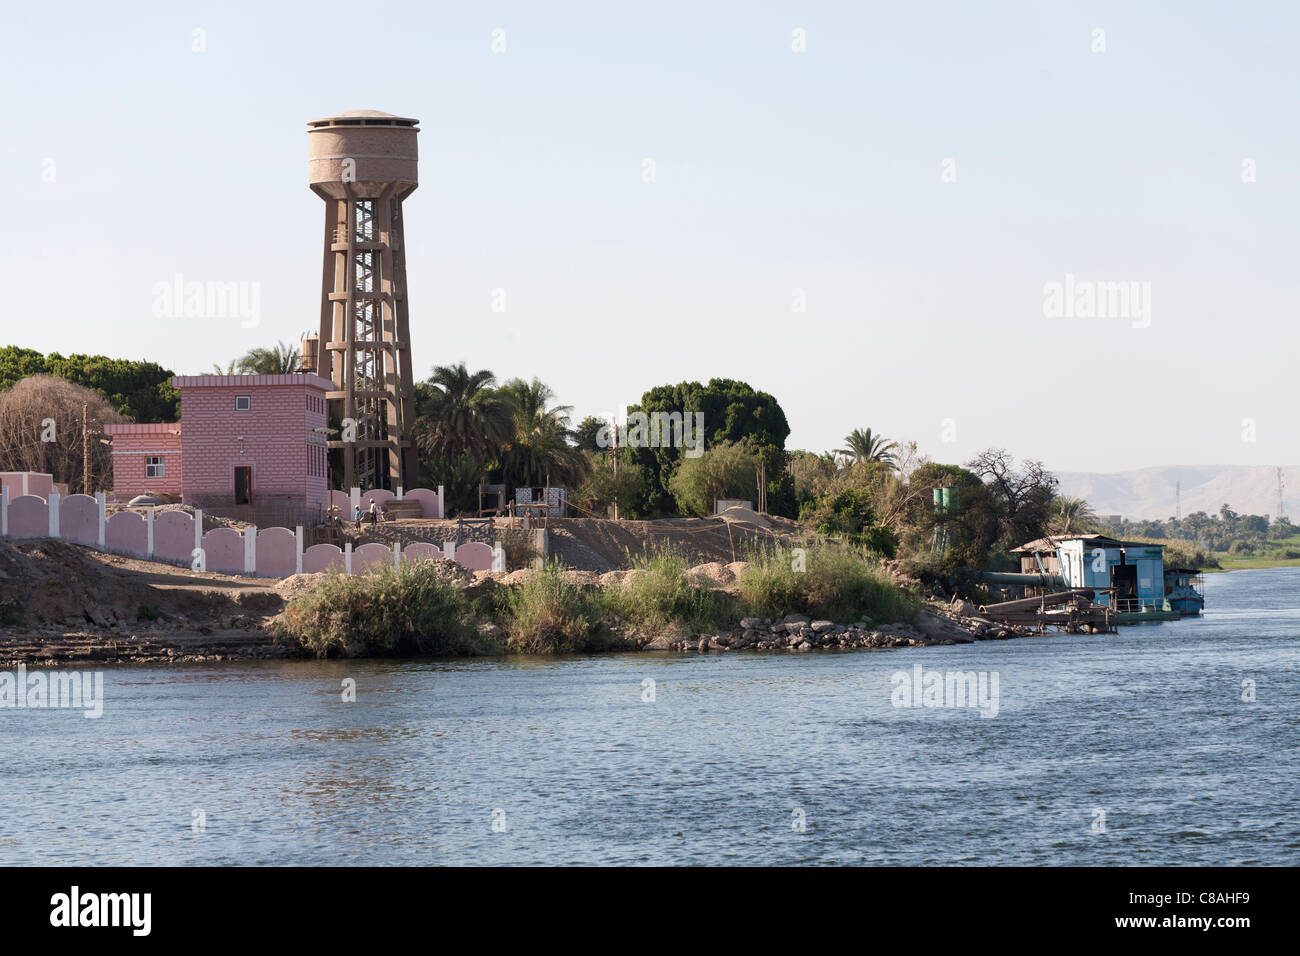 Section of Nile river bank with official buildings painted pink  and large water tower near water's edge, Egypt, Africa Stock Photo